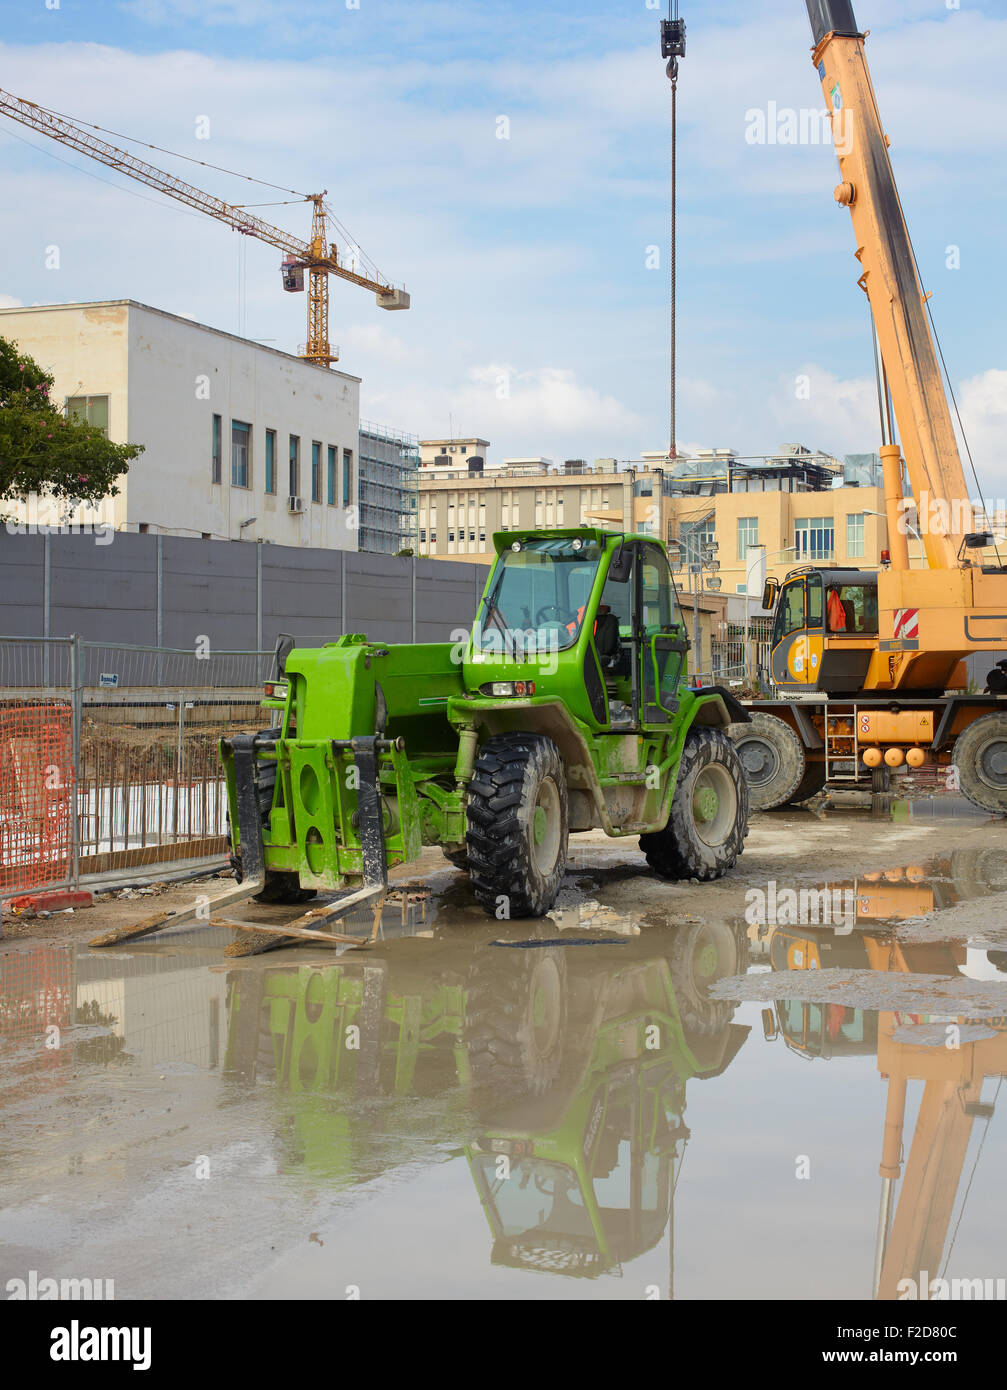 Green excavator in a construction site Stock Photo